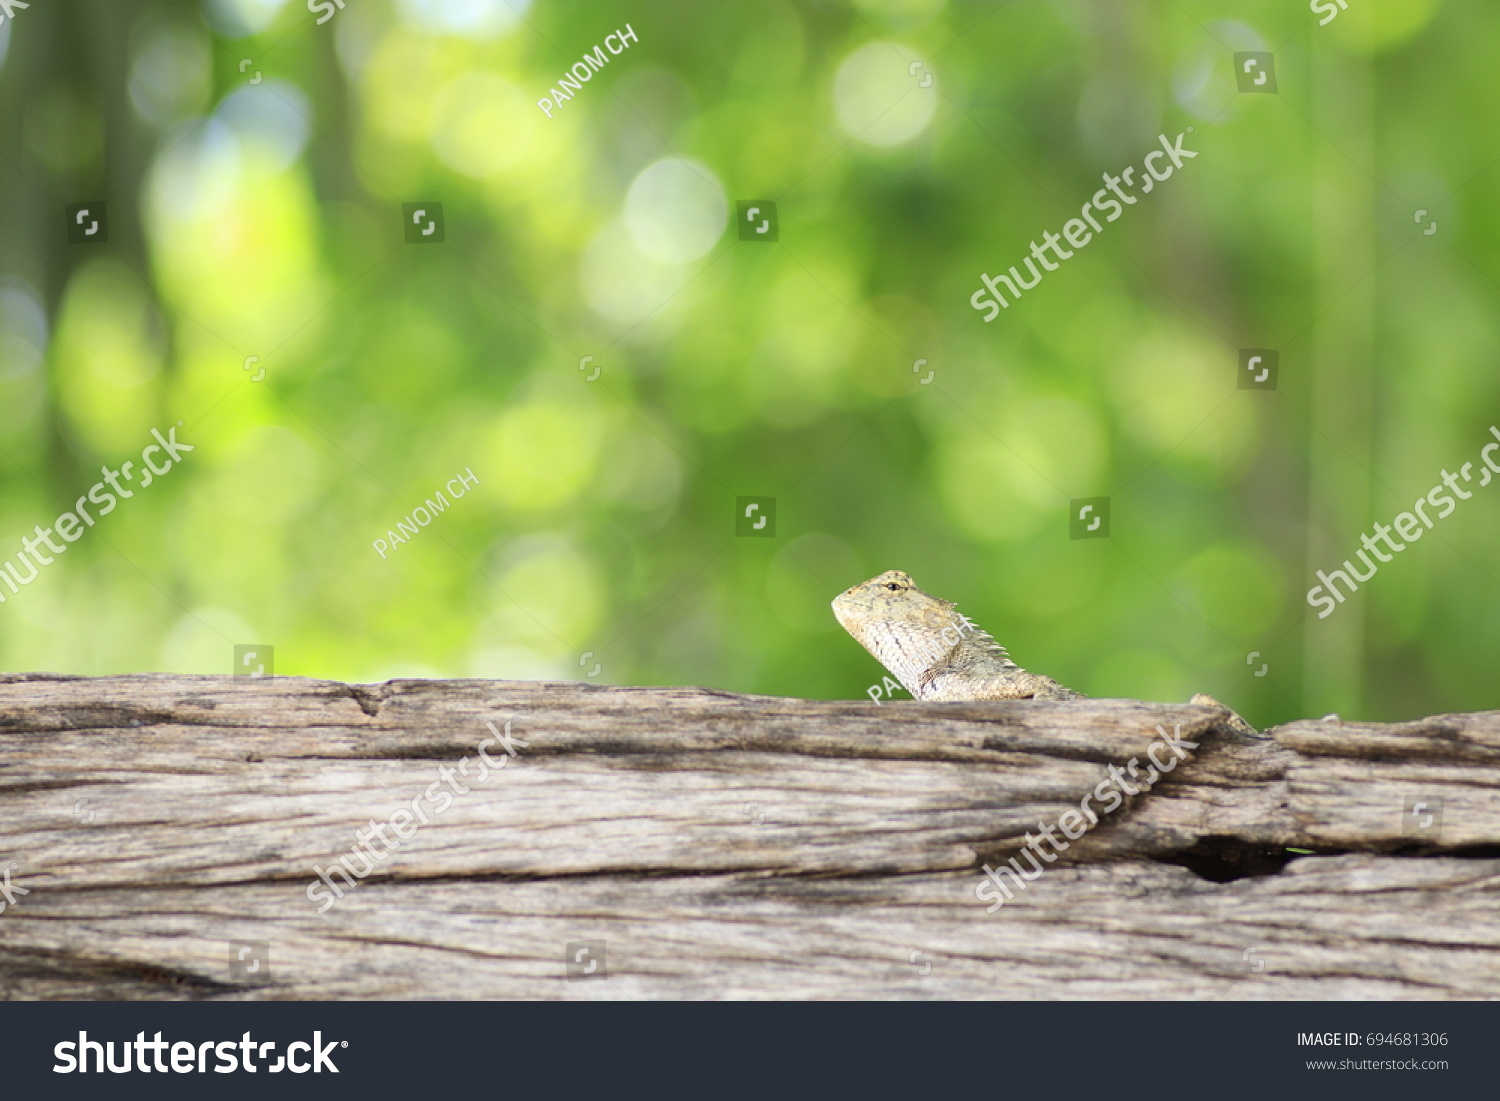 the grey chameleon on trunk and white and yellow bokeh on green background  #694681306